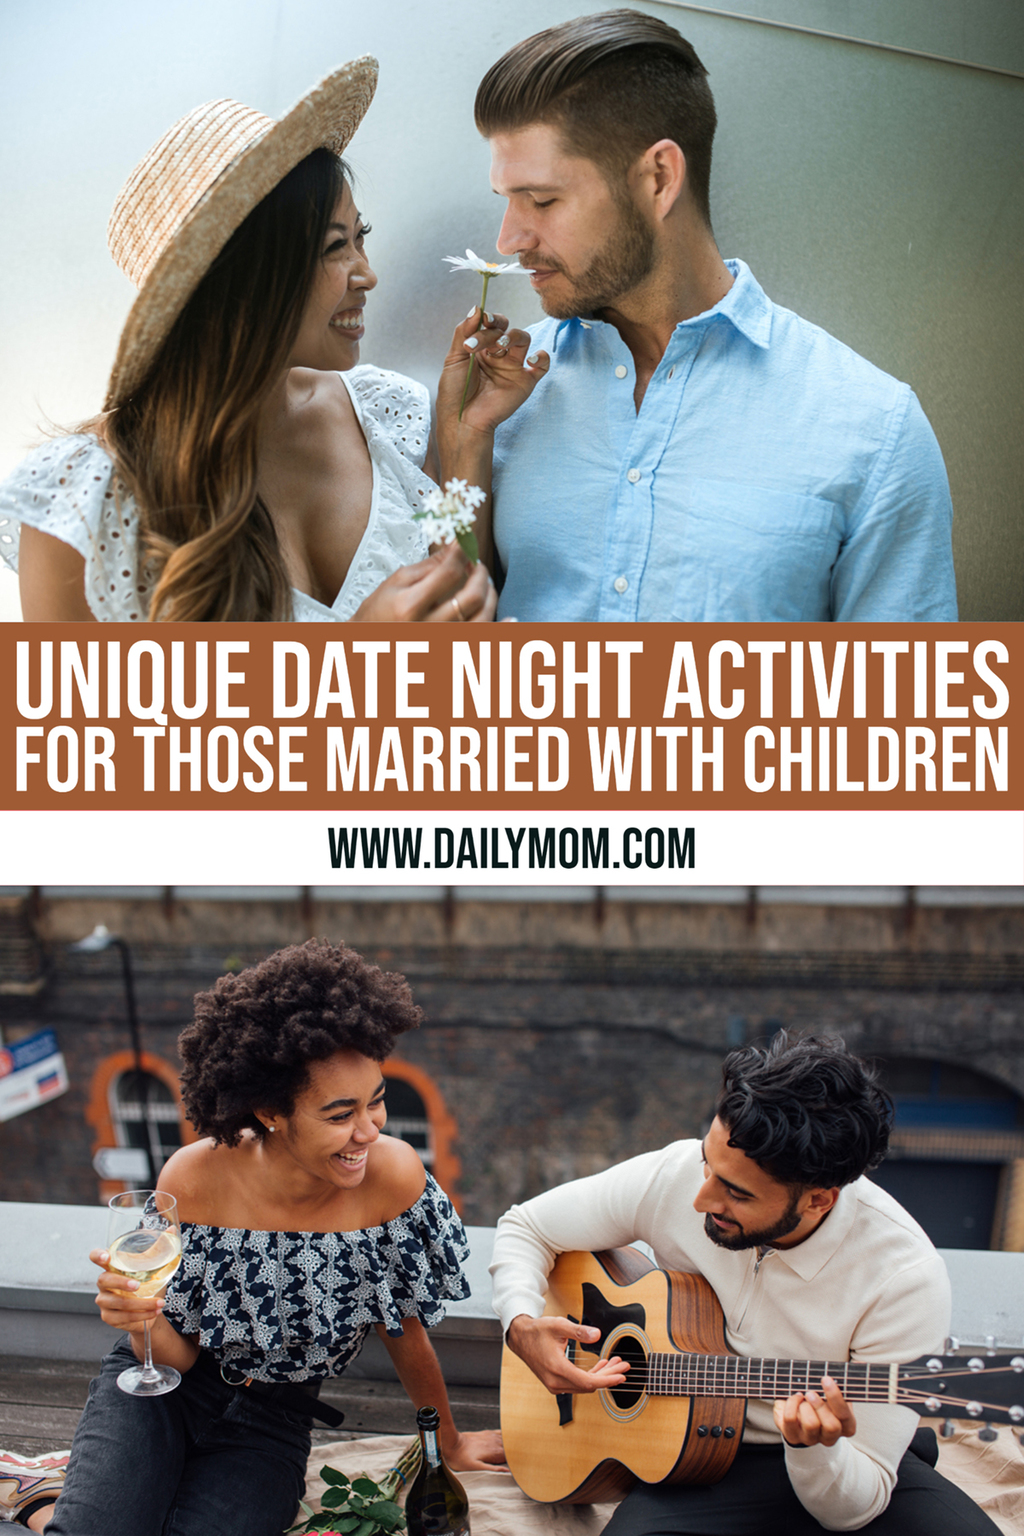 12 Unique Date Night Activities To Keep Life Interesting For Those Married With Children